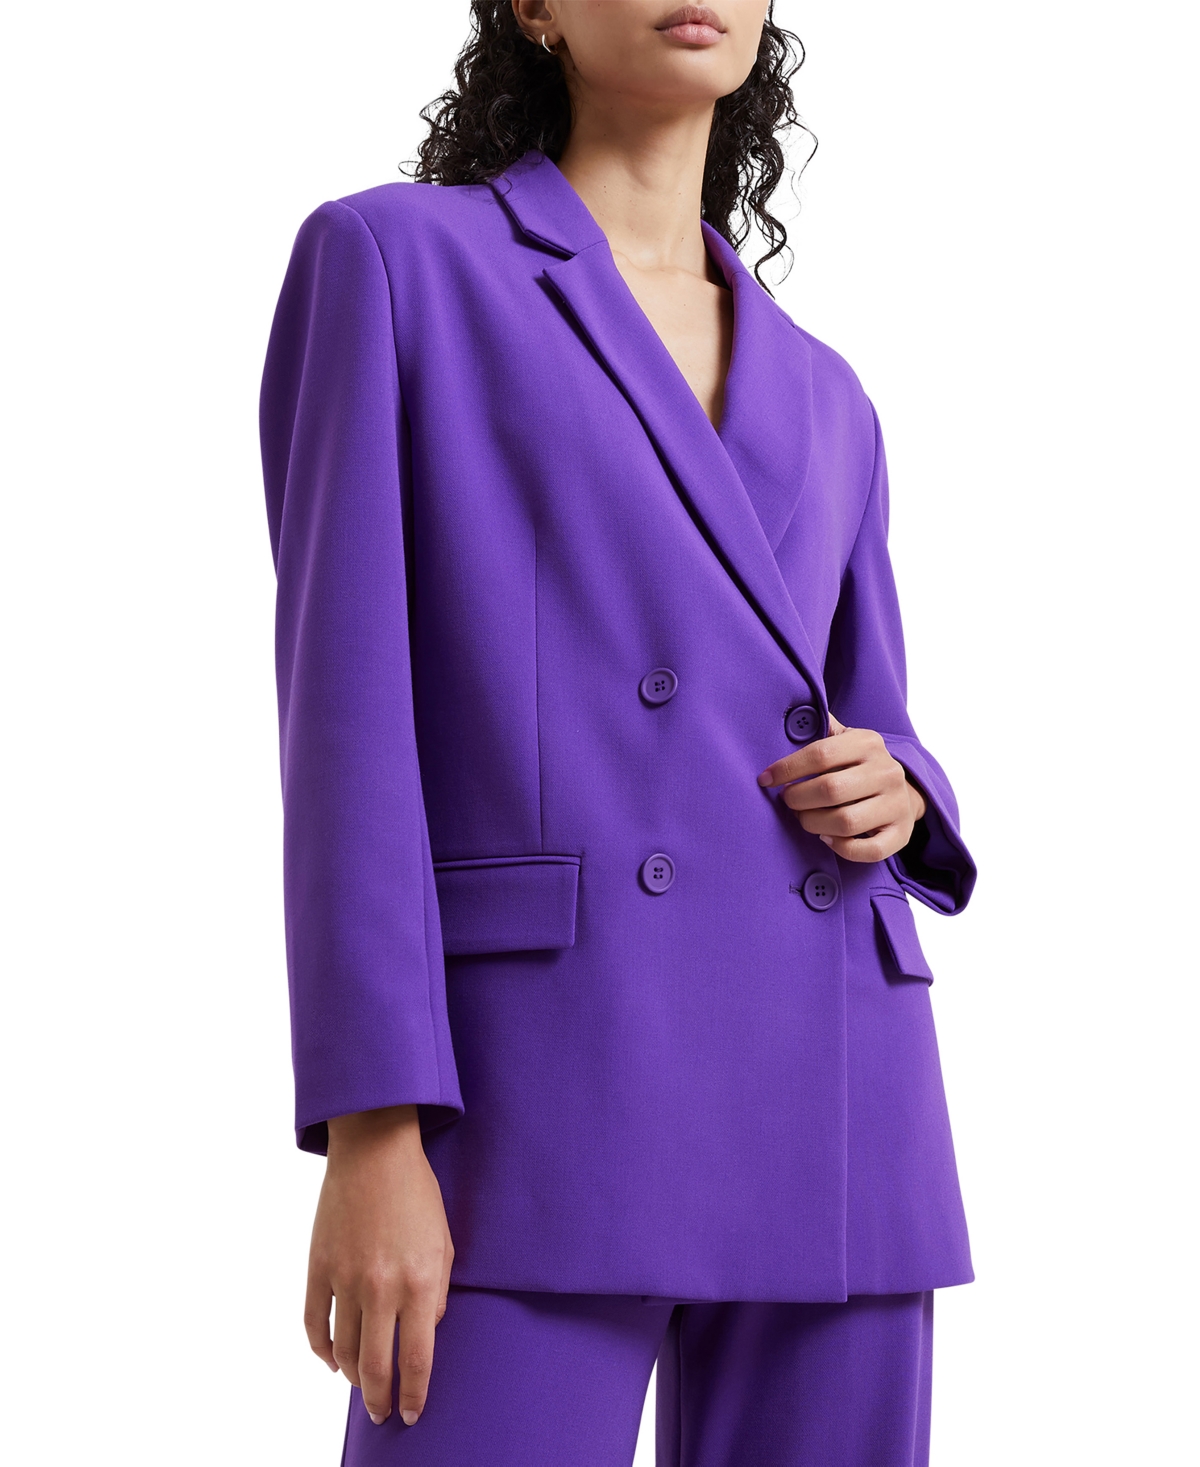 Women's Whisper Notched Collar Double-Breasted Blazer - Cobalt Violet